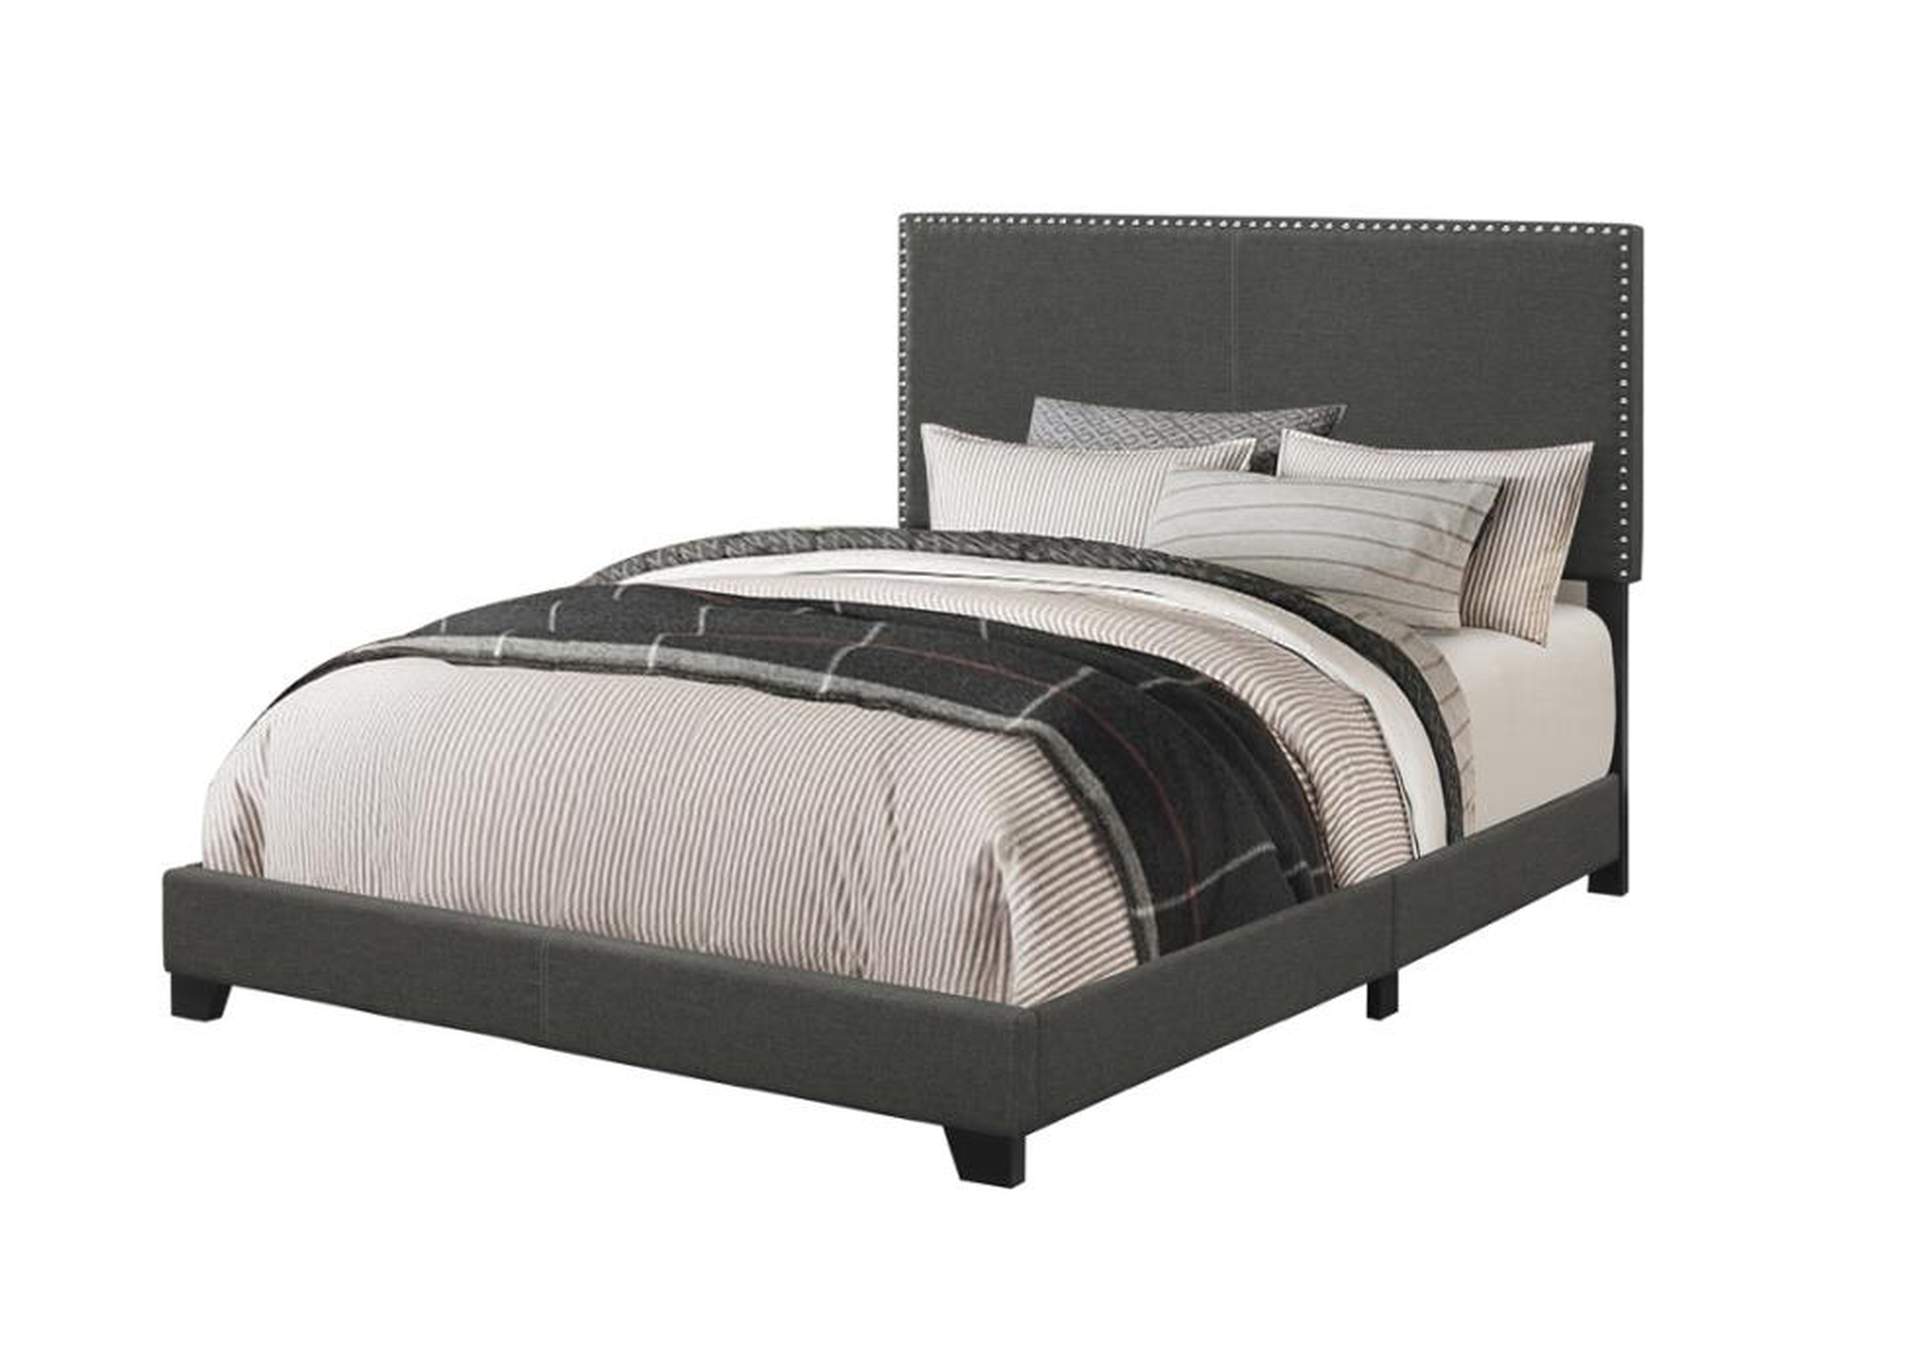 Boyd California King Upholstered Bed with Nailhead Trim Charcoal,Coaster Furniture